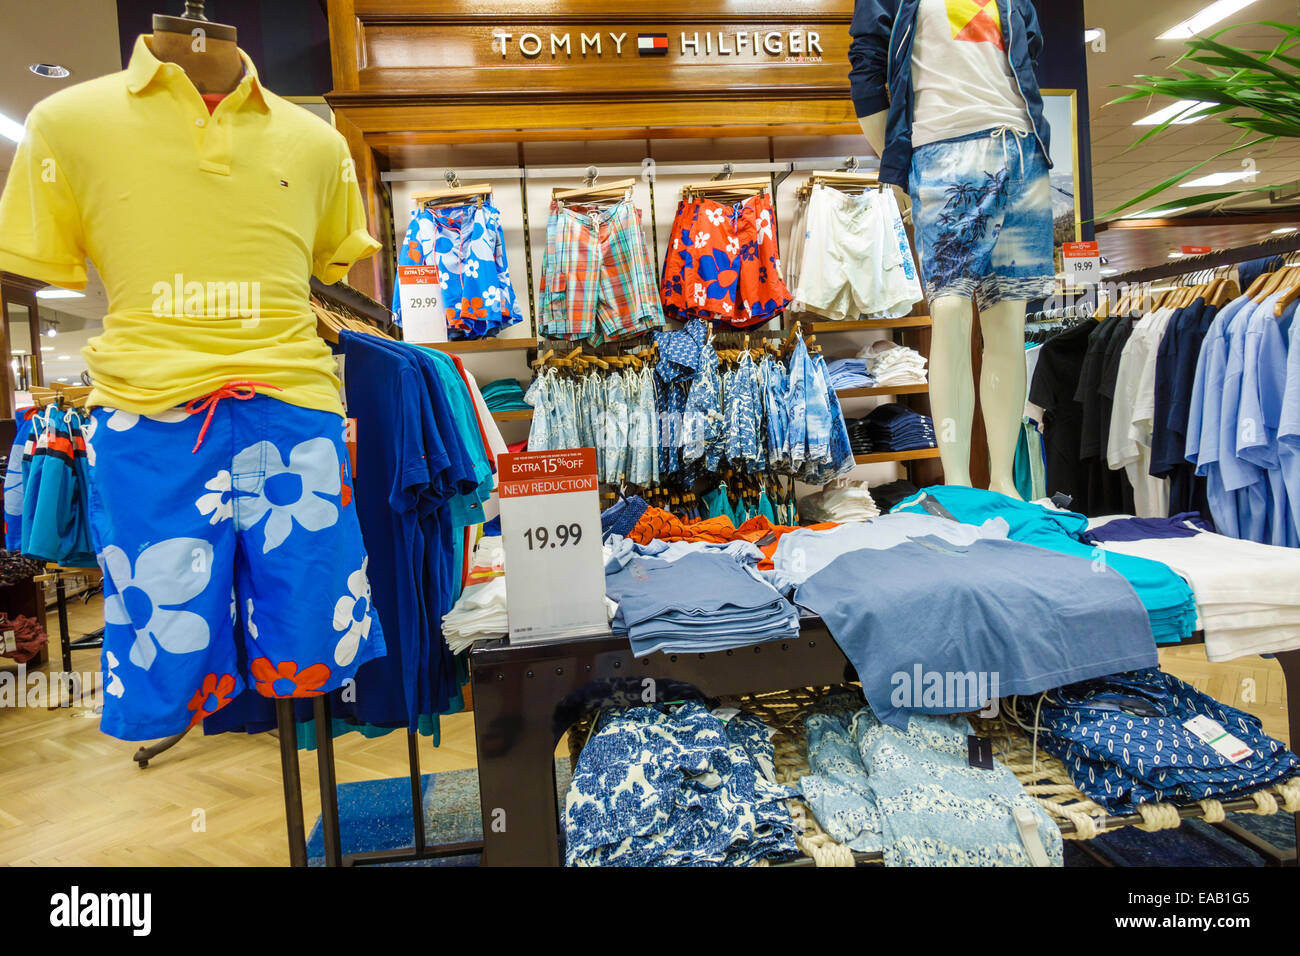 Tommy Hilfiger Store Display High Resolution Stock Photography and Images -  Alamy